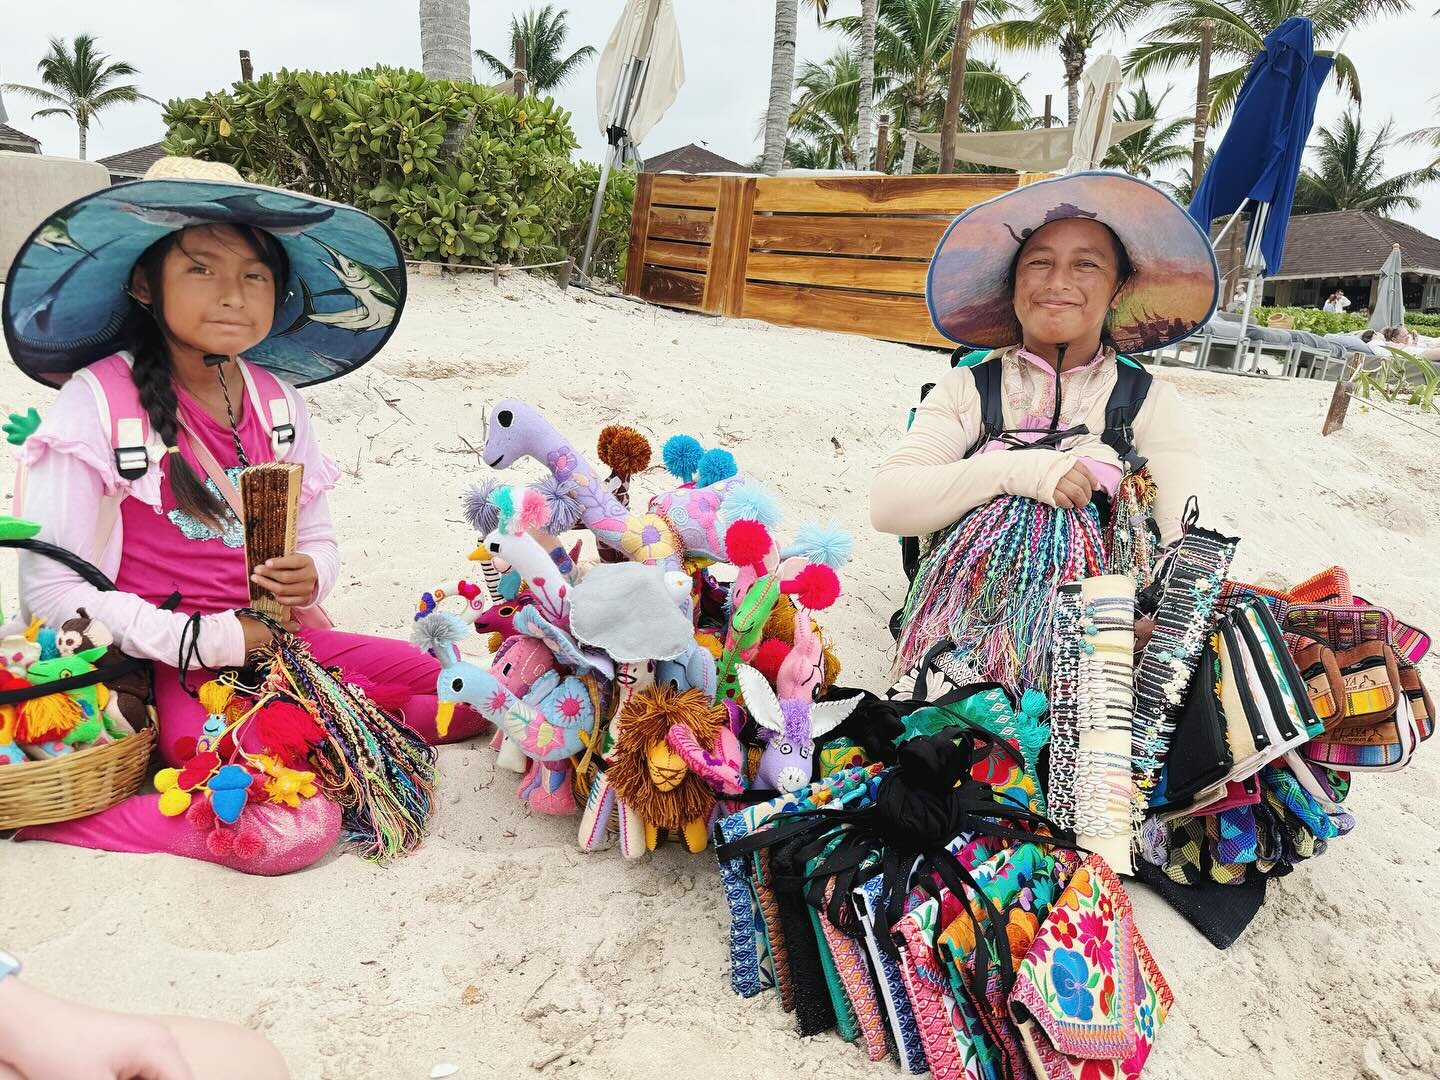 One of my favorite parts of the trip was shopping from these lovely ladies every morning on the beach. 🏝️ ❤️